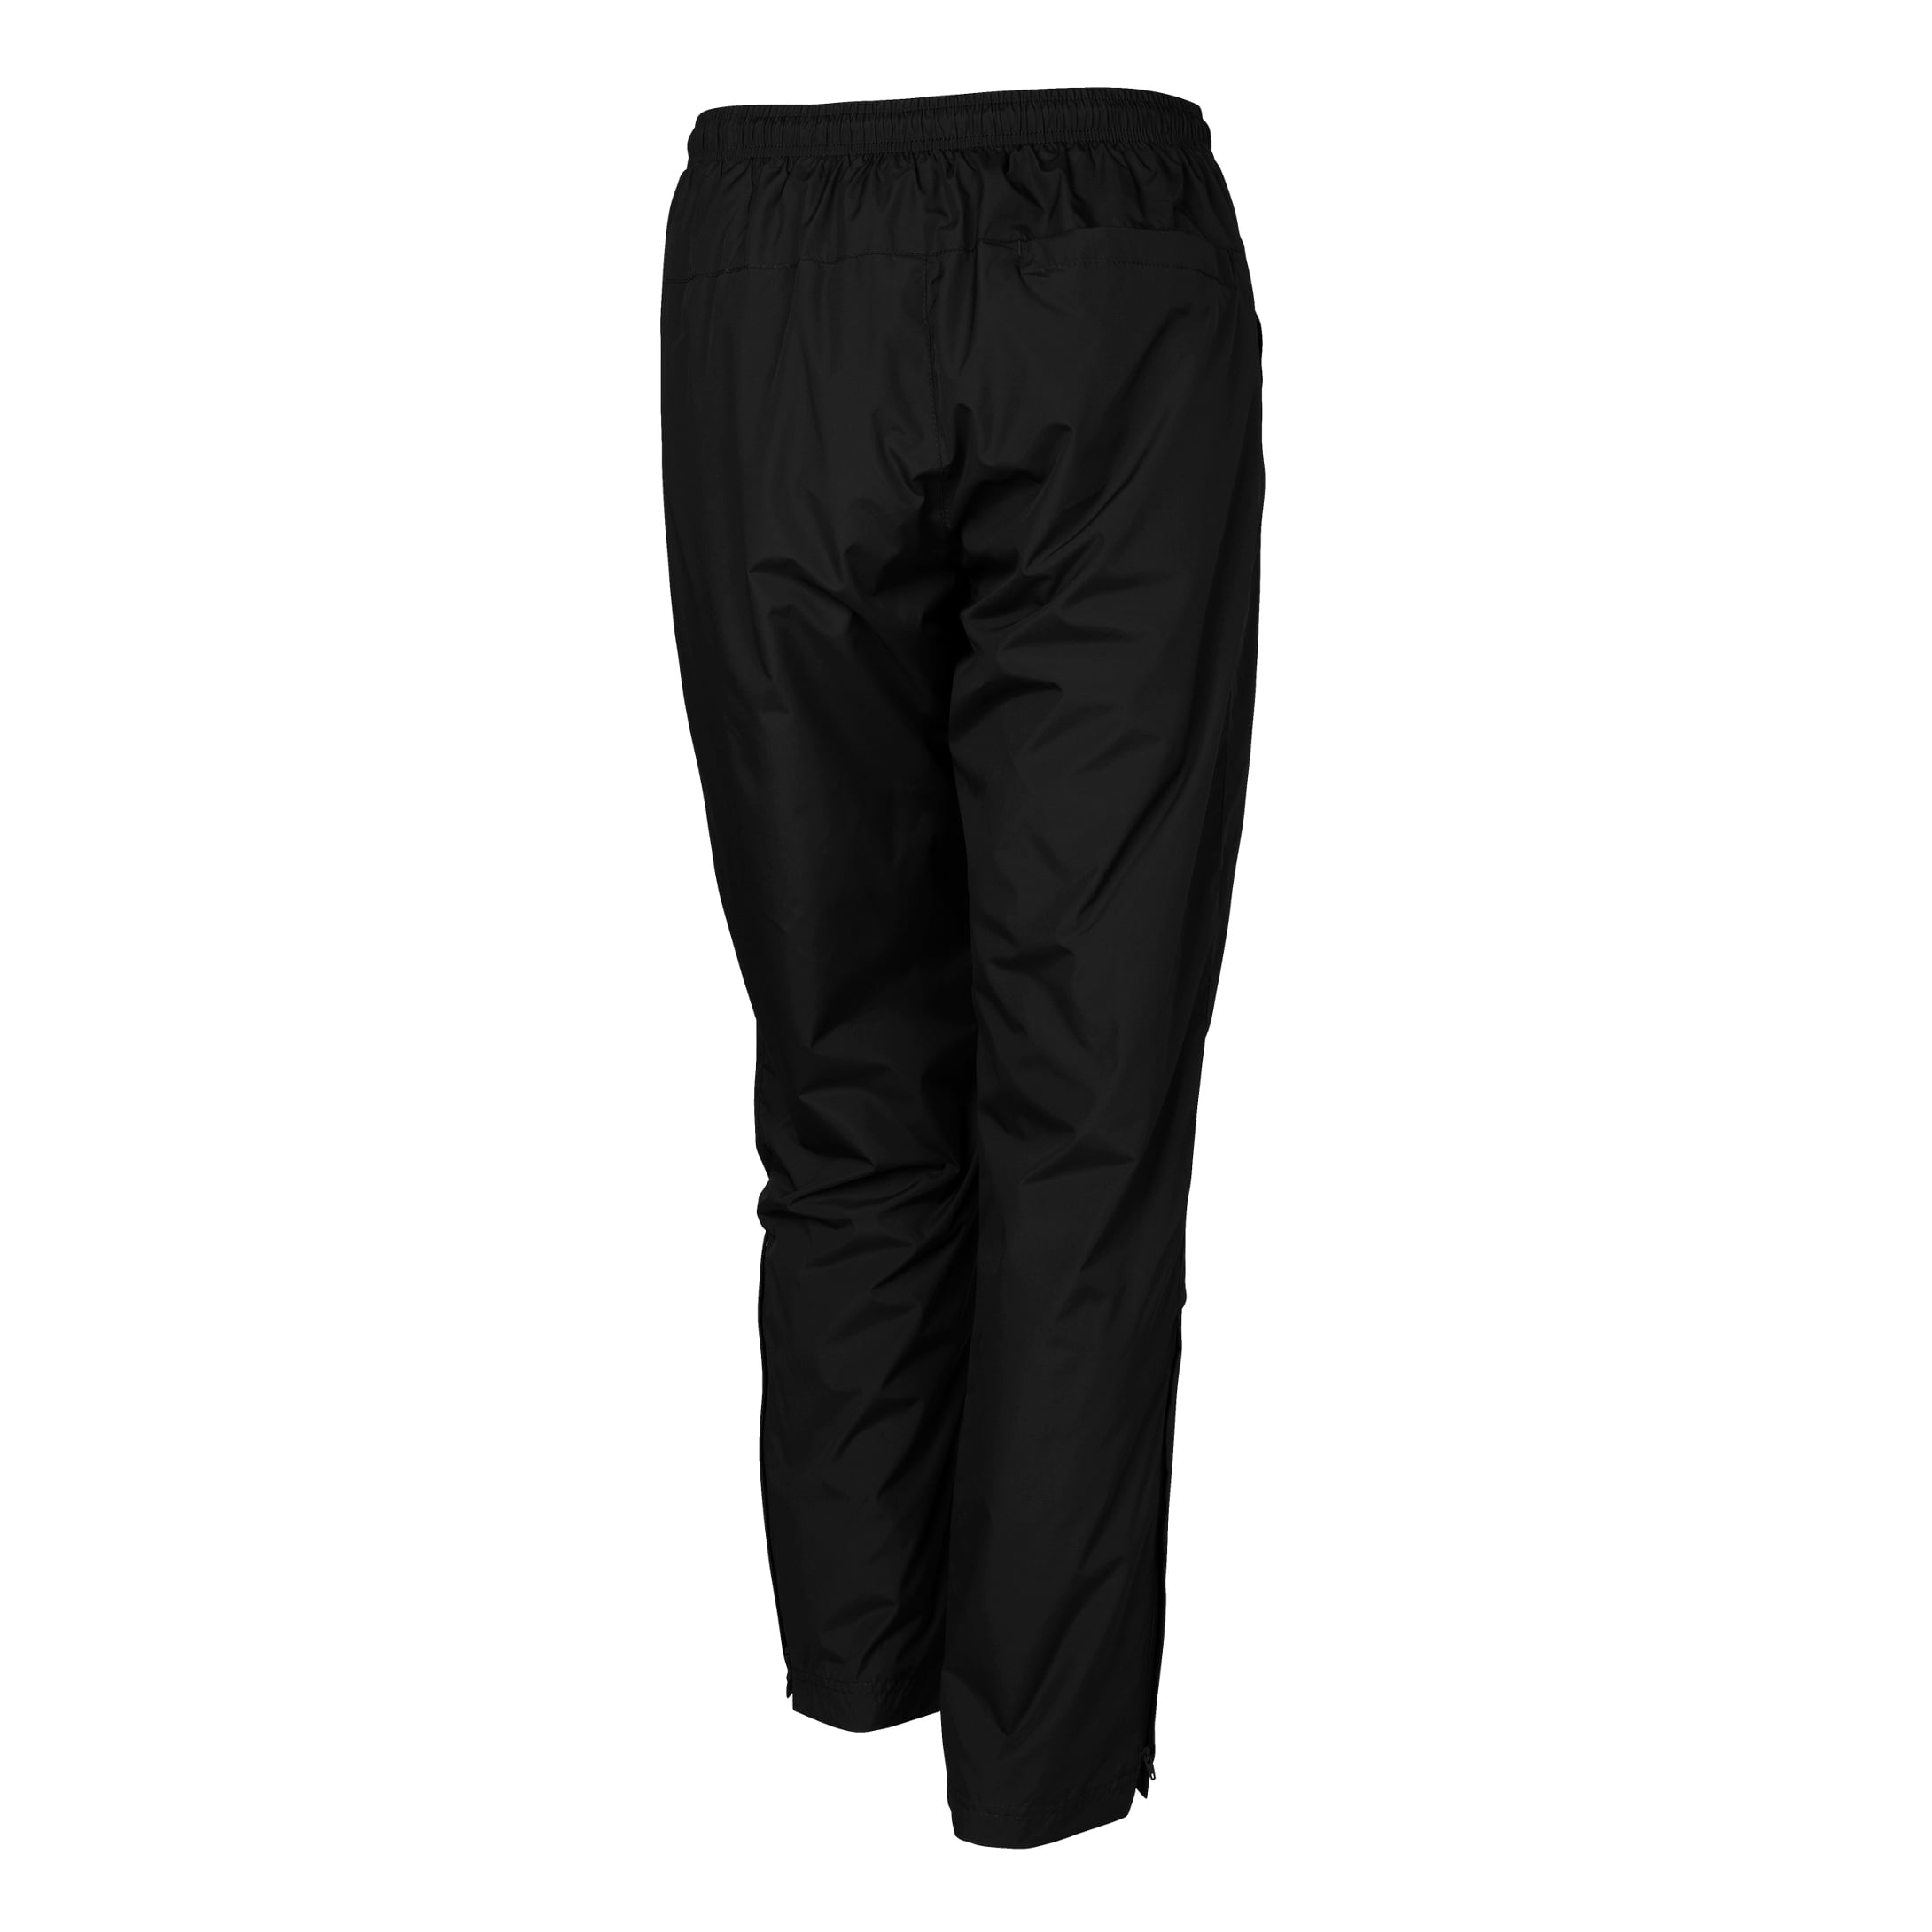 Mafoose Men's Lightweight Hiking Pants Breathable Quick Dry Fit Camping  Fishing Running Athletic Active Jogger Wind Pants Black 3XL 